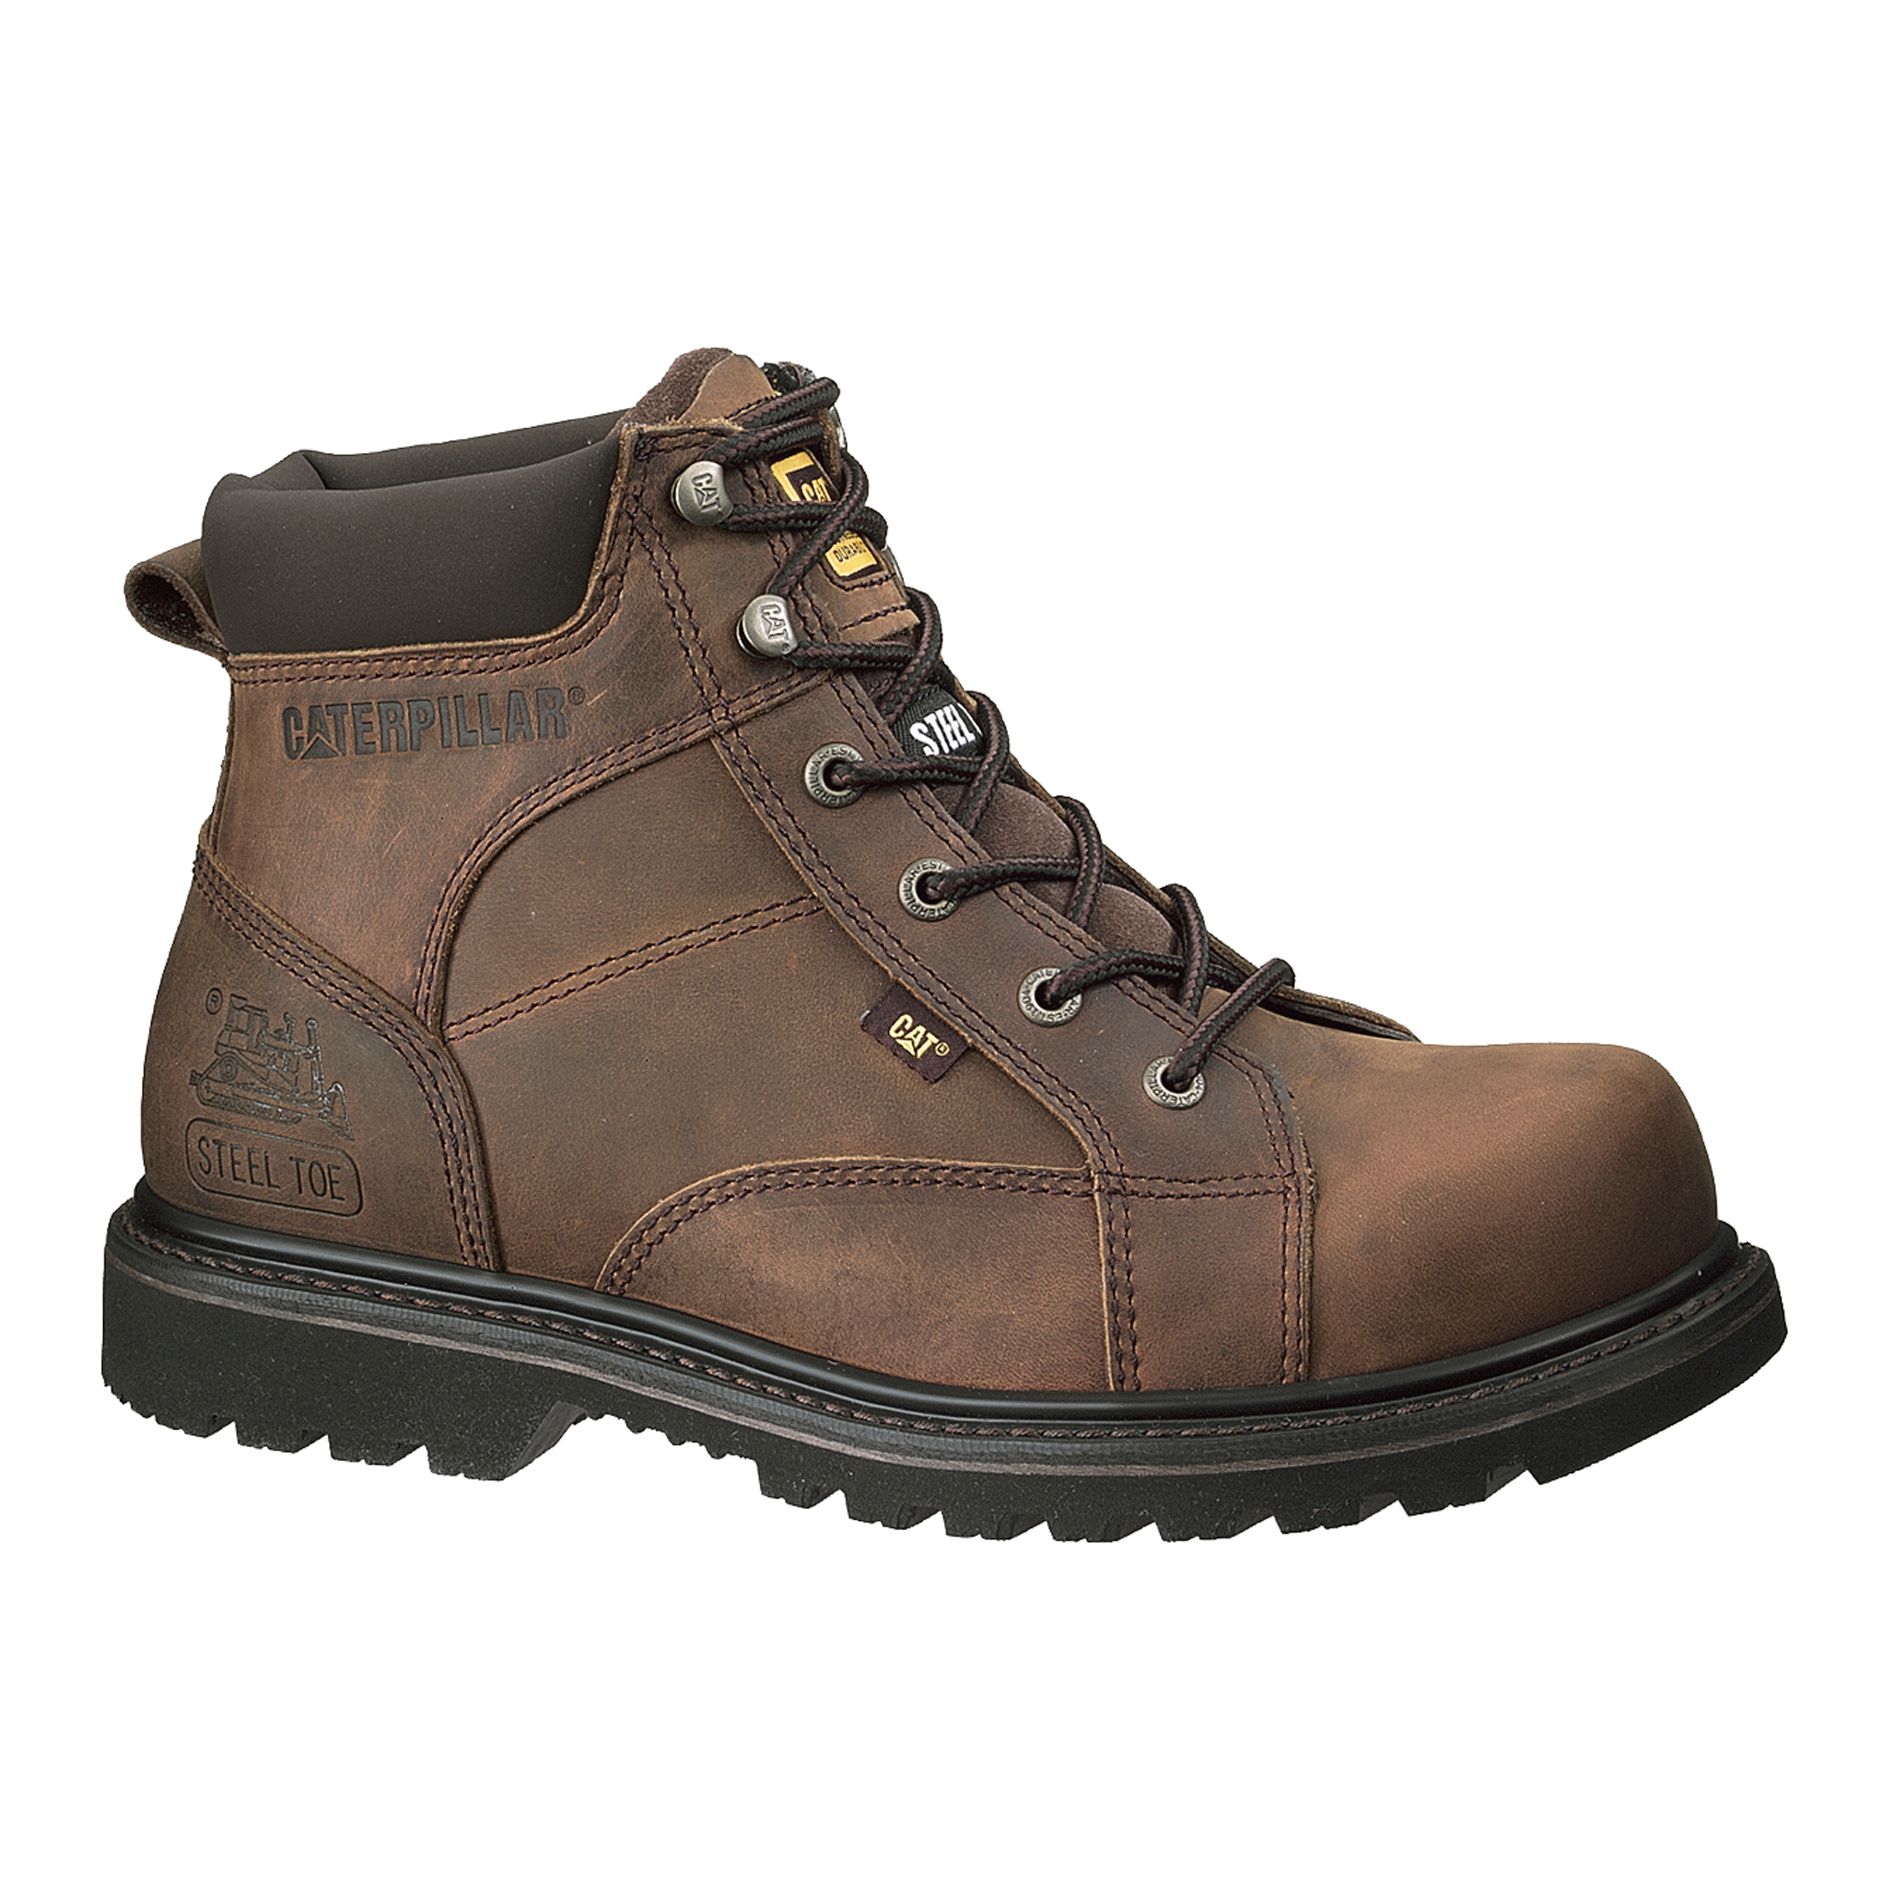 Cat Footwear Men's 6" Whiston Leather Soft Toe Slip Resistant Work Boot P73380 Wide Width Available - Brown